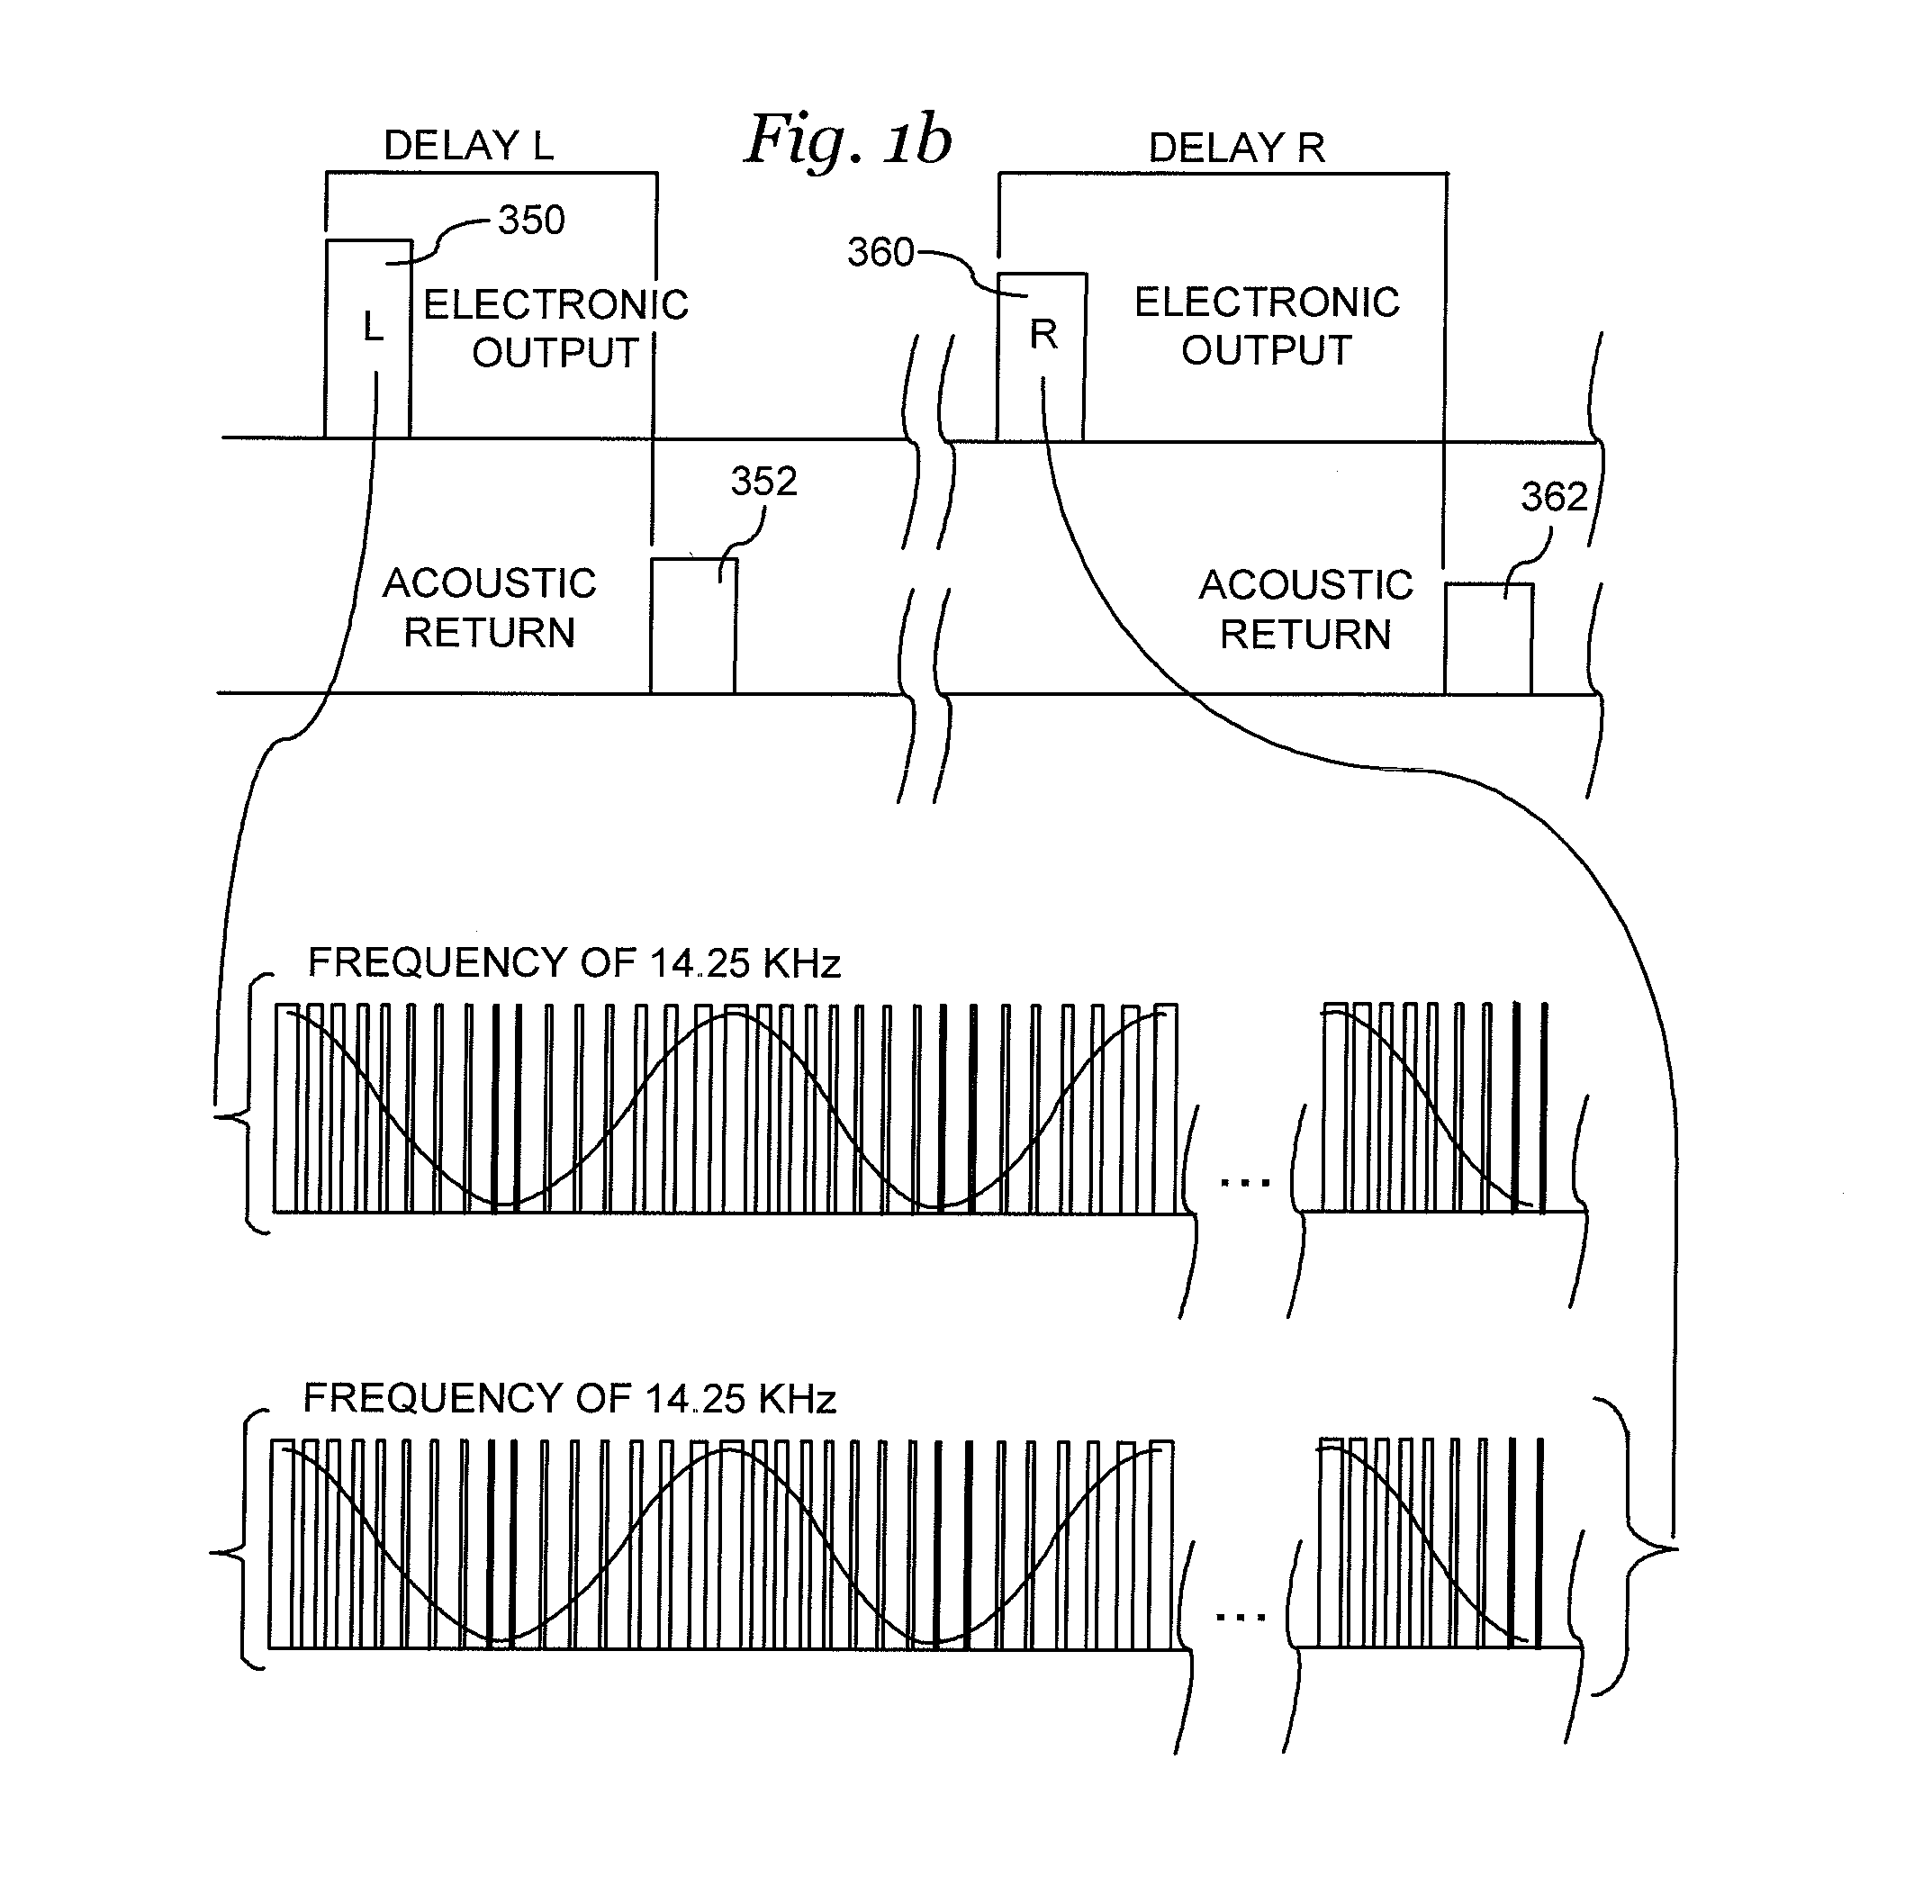 Apparatus and method for inhibiting portable electronic devices